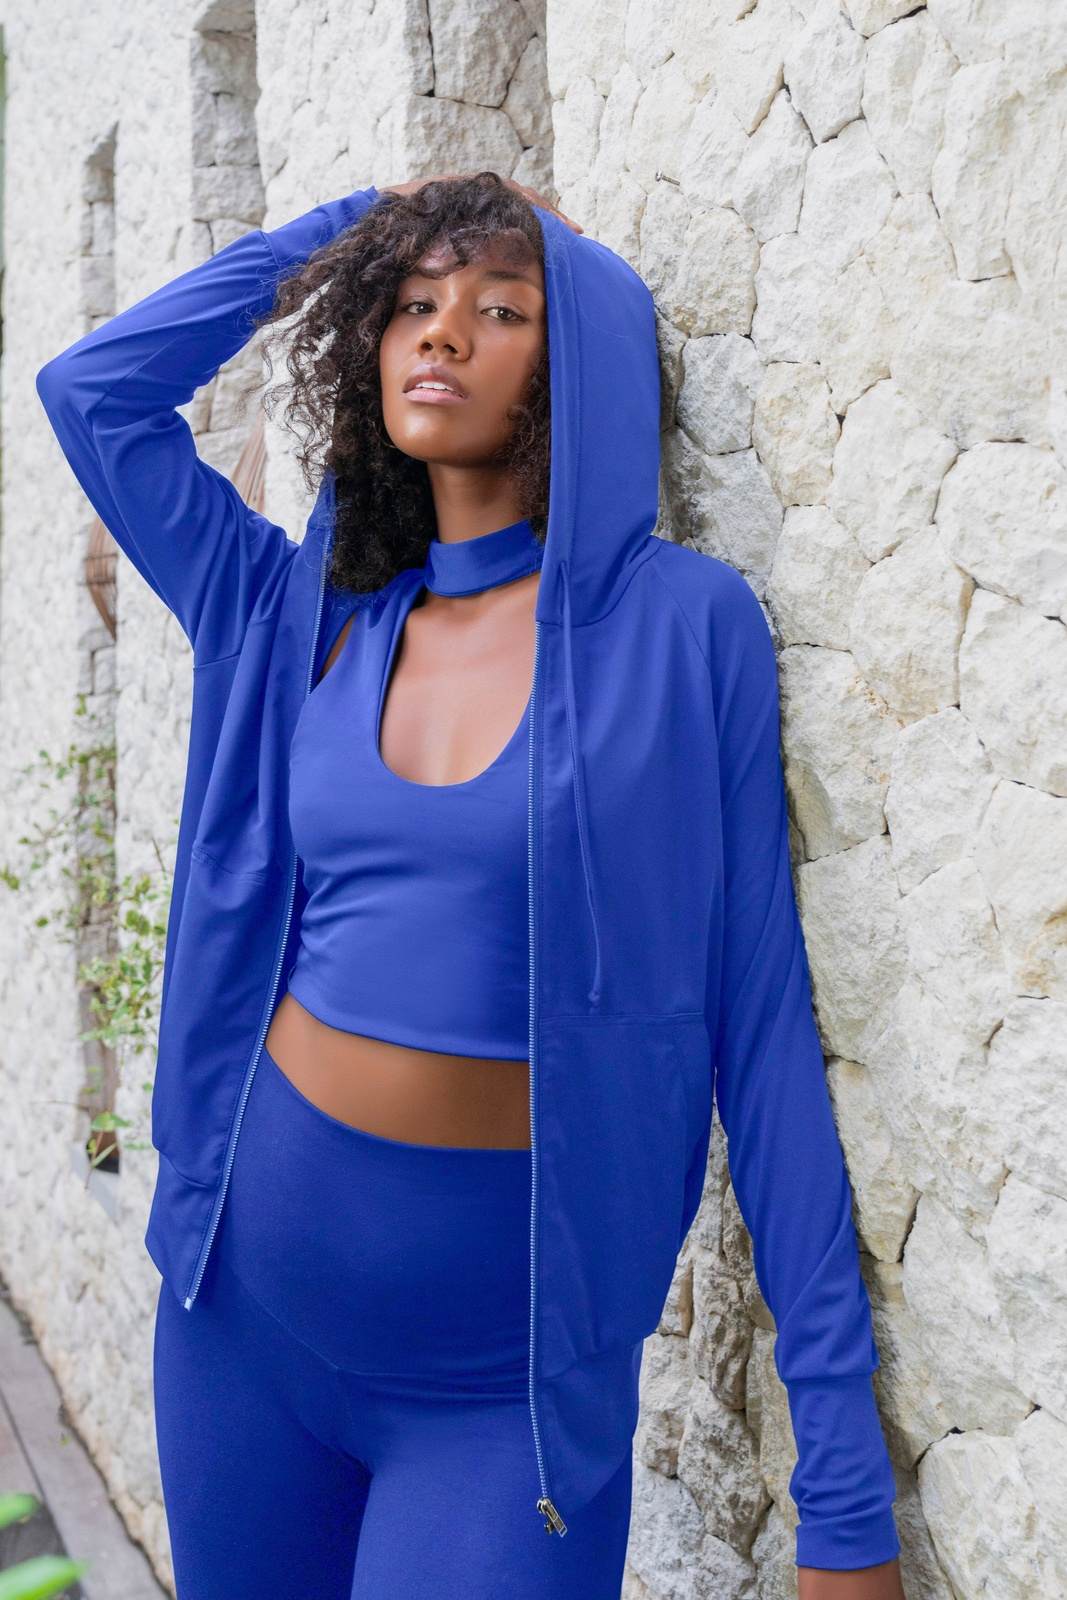 Mock neck crop top in cobalt blue and matching colored high waisted leggings and hoodie, a complete outfit set made from eco friendly recycled plastic fabric by Ekoluxe sustainable loungewear brand